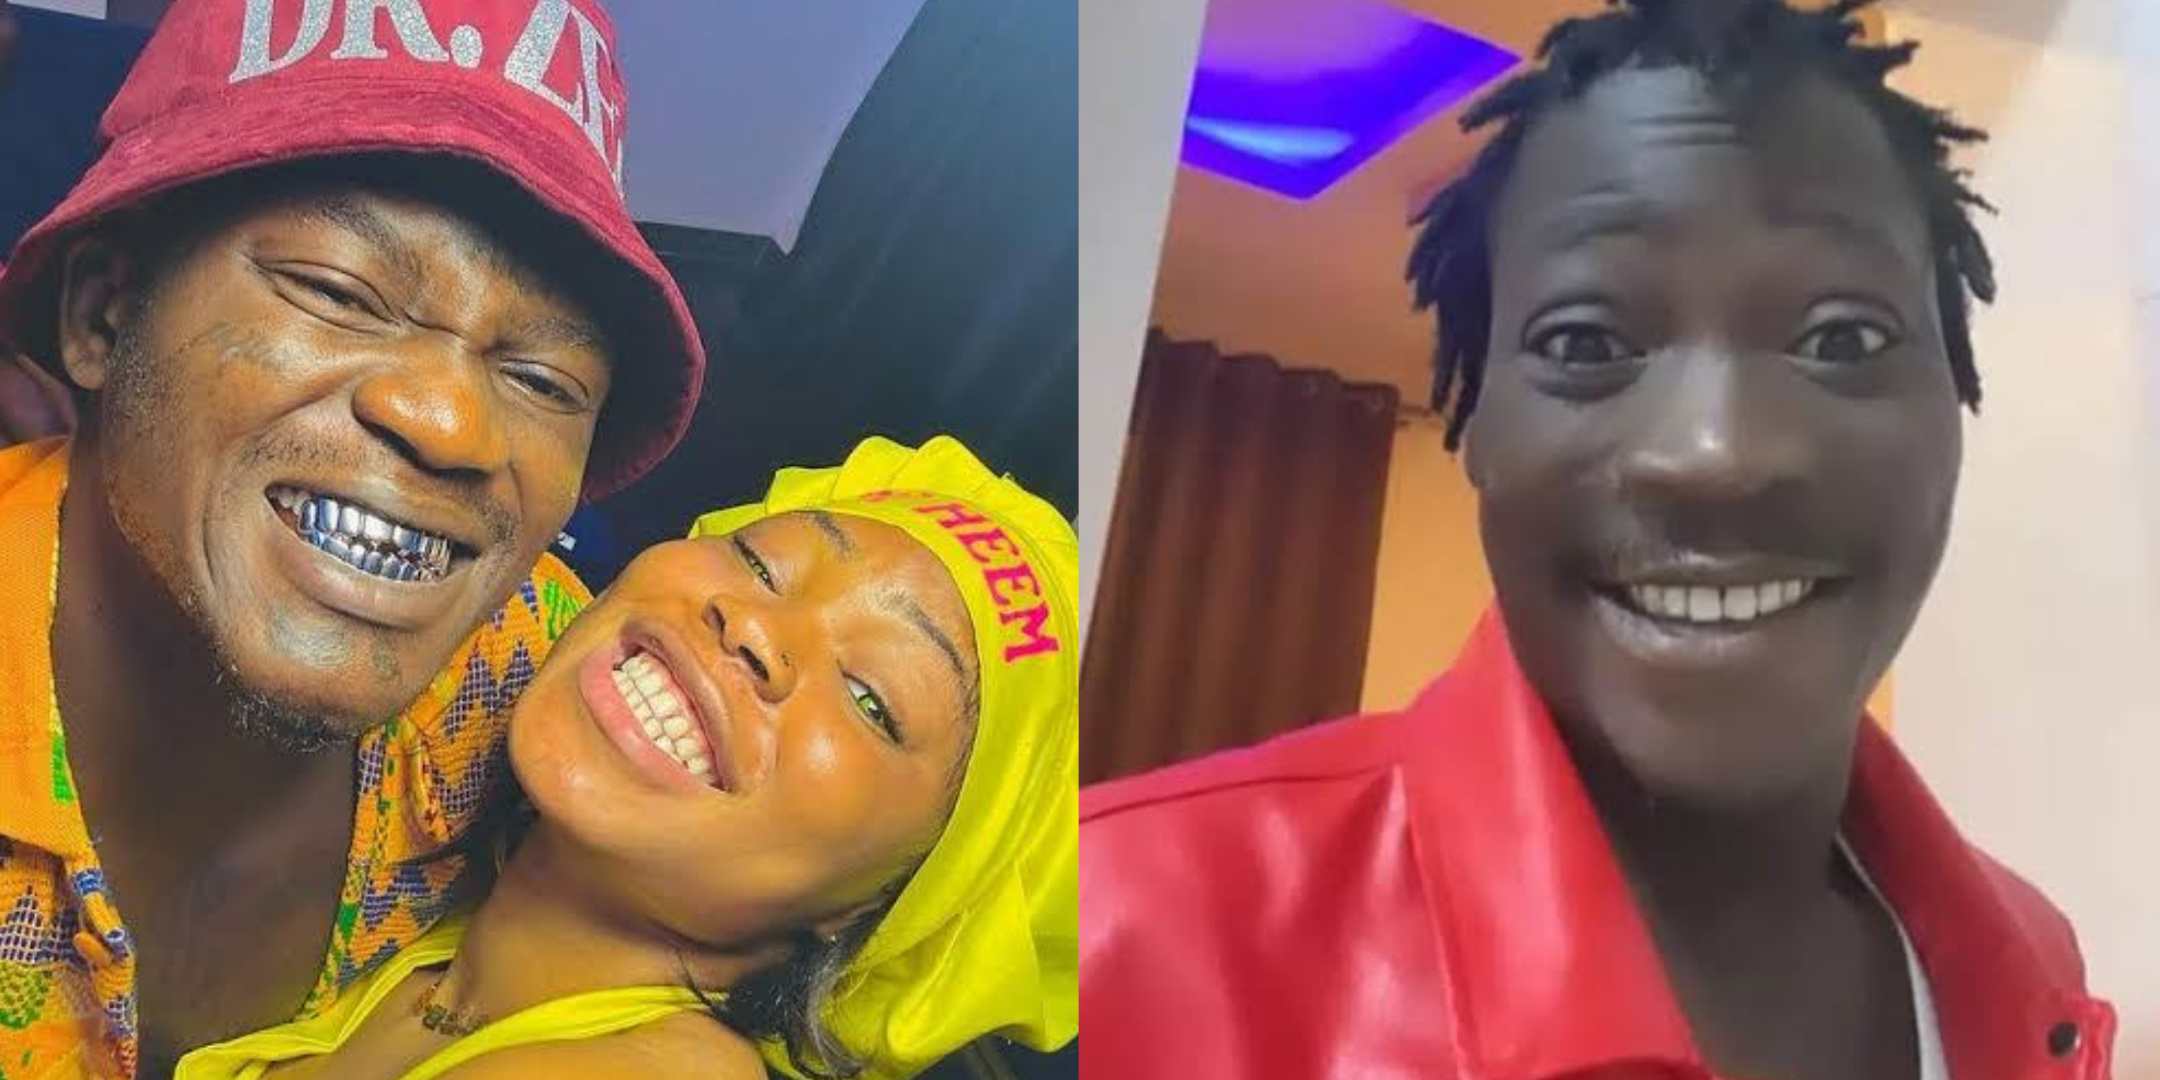 Portable's wife, Omobewaji, files a complaint with the police against DJ Chicken for attempting to blackmail her